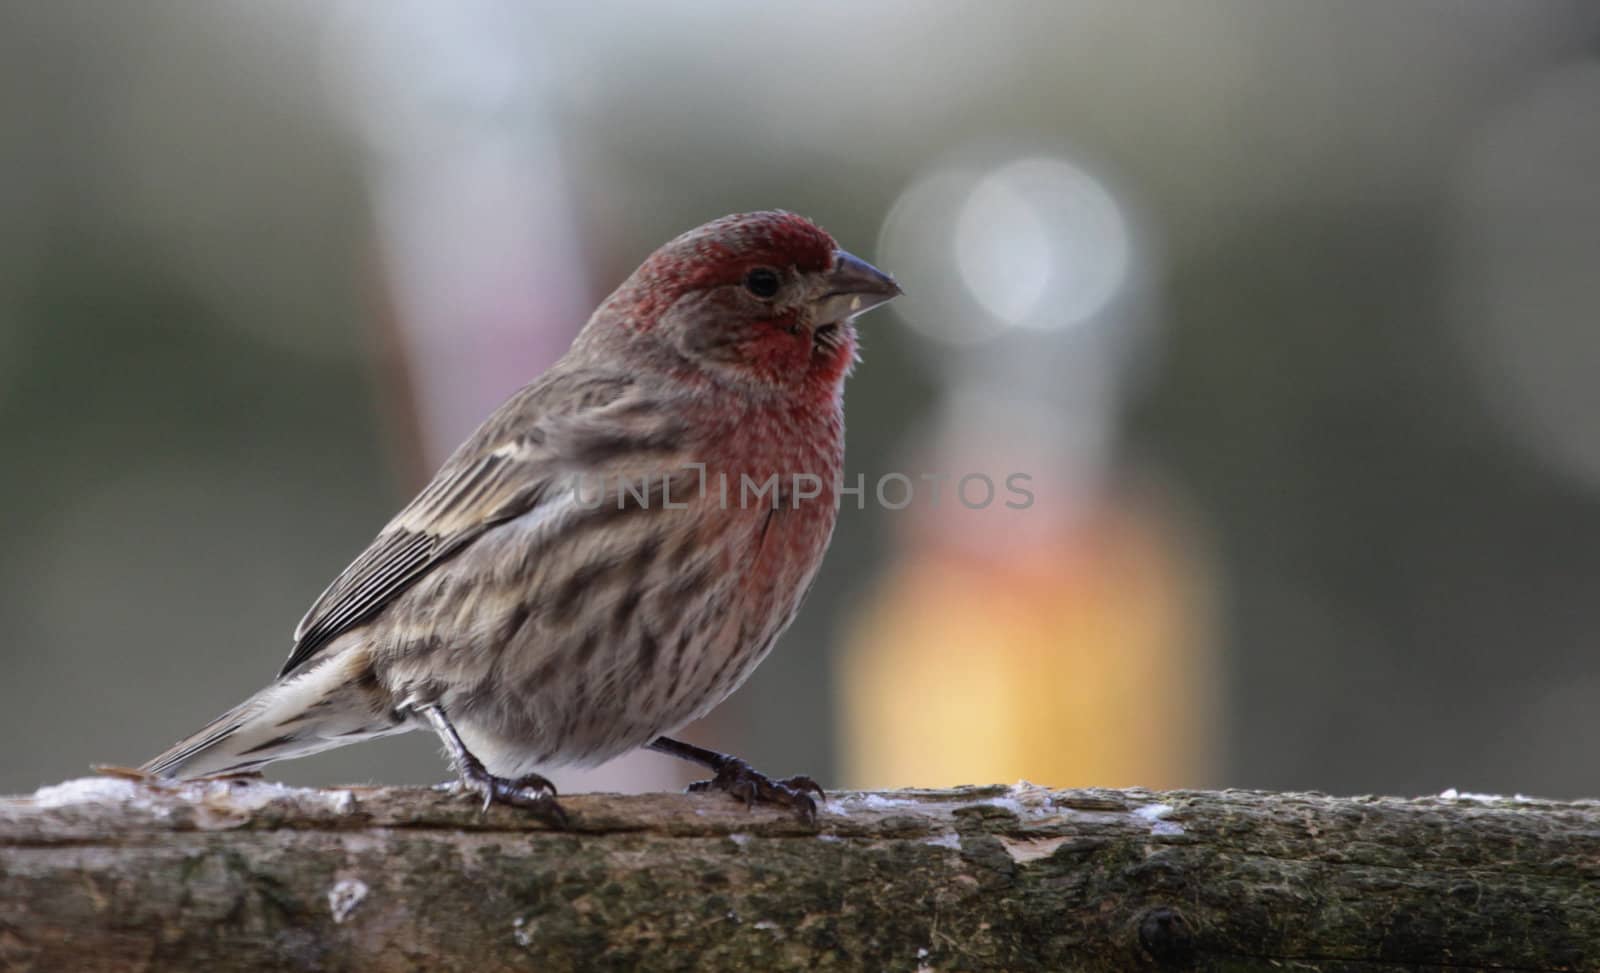 A house finch (Carpodacus mexicanus) sitting patiently.